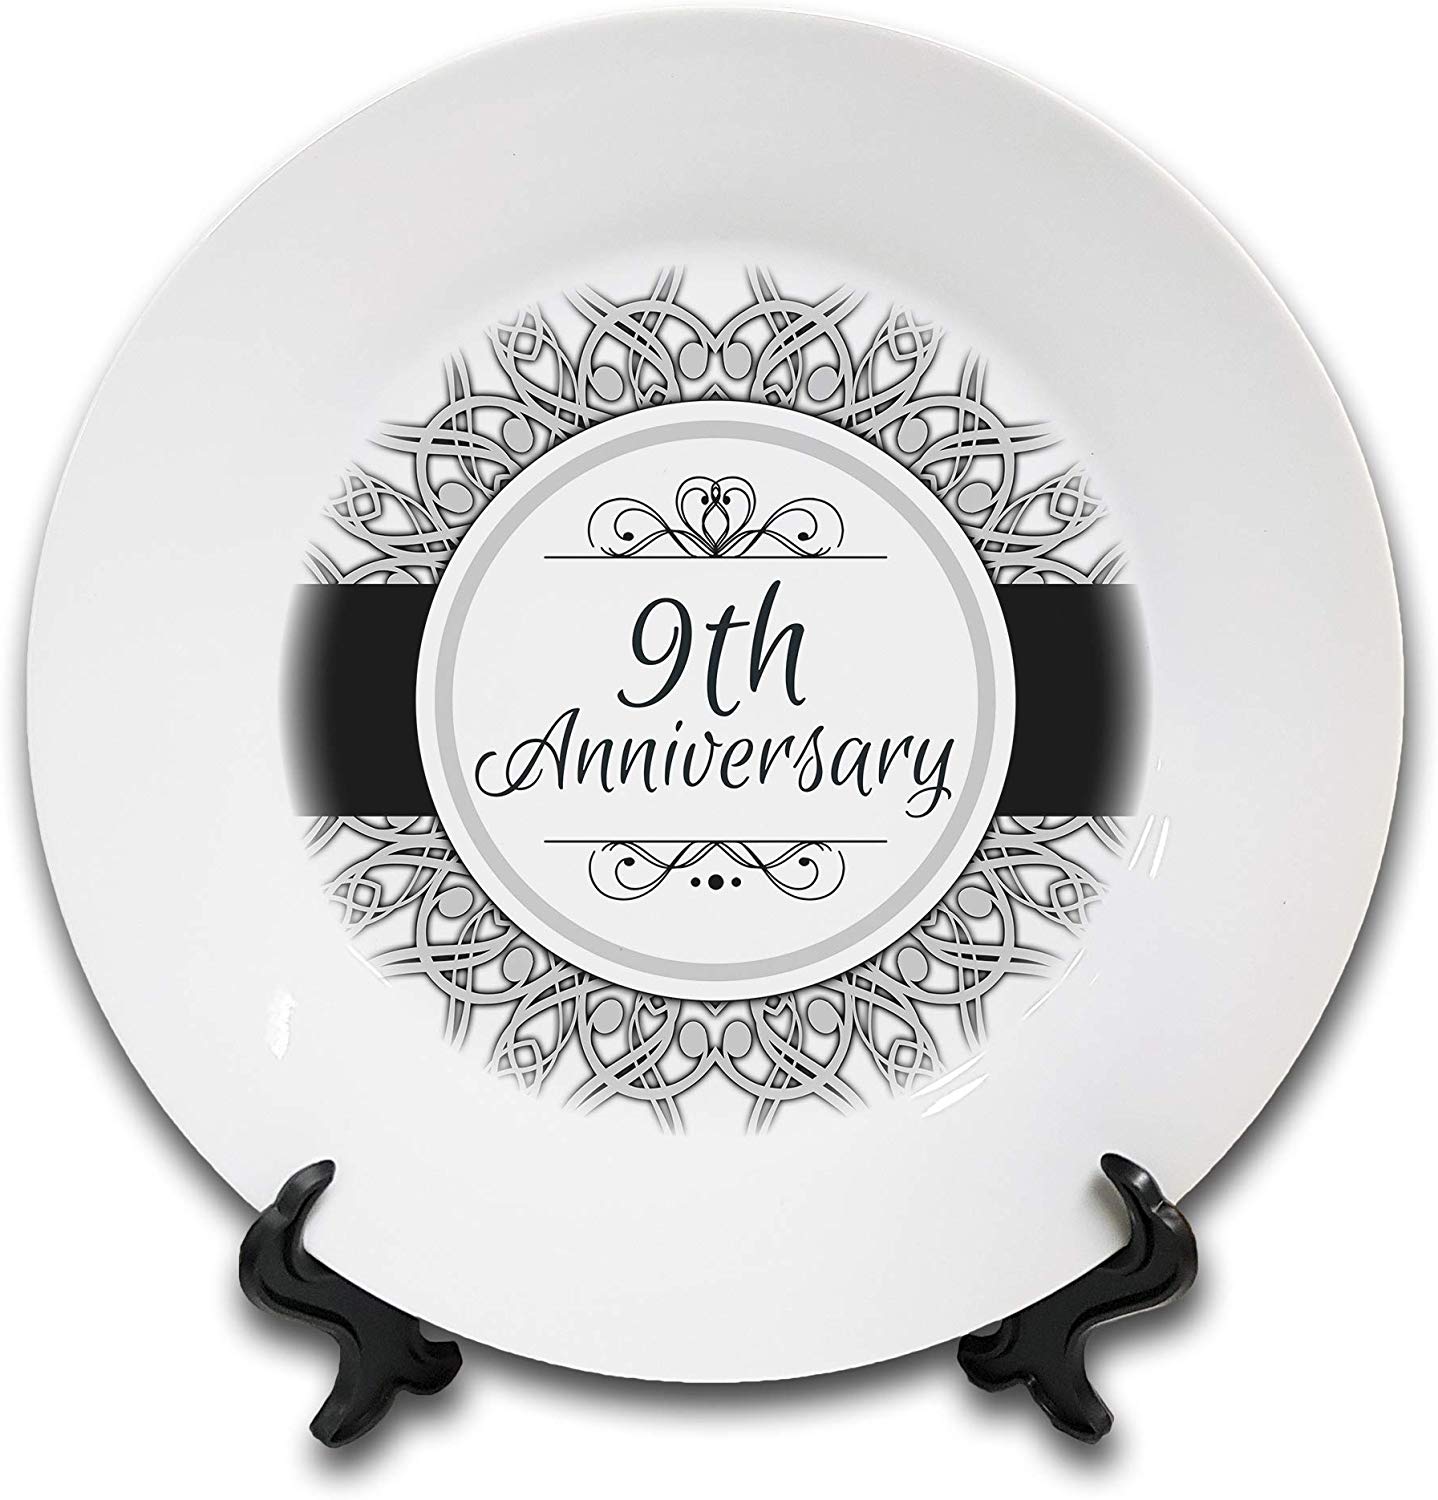 9th Anniversary (Pottery) Novelty Gift Ceramic Plate & Stand